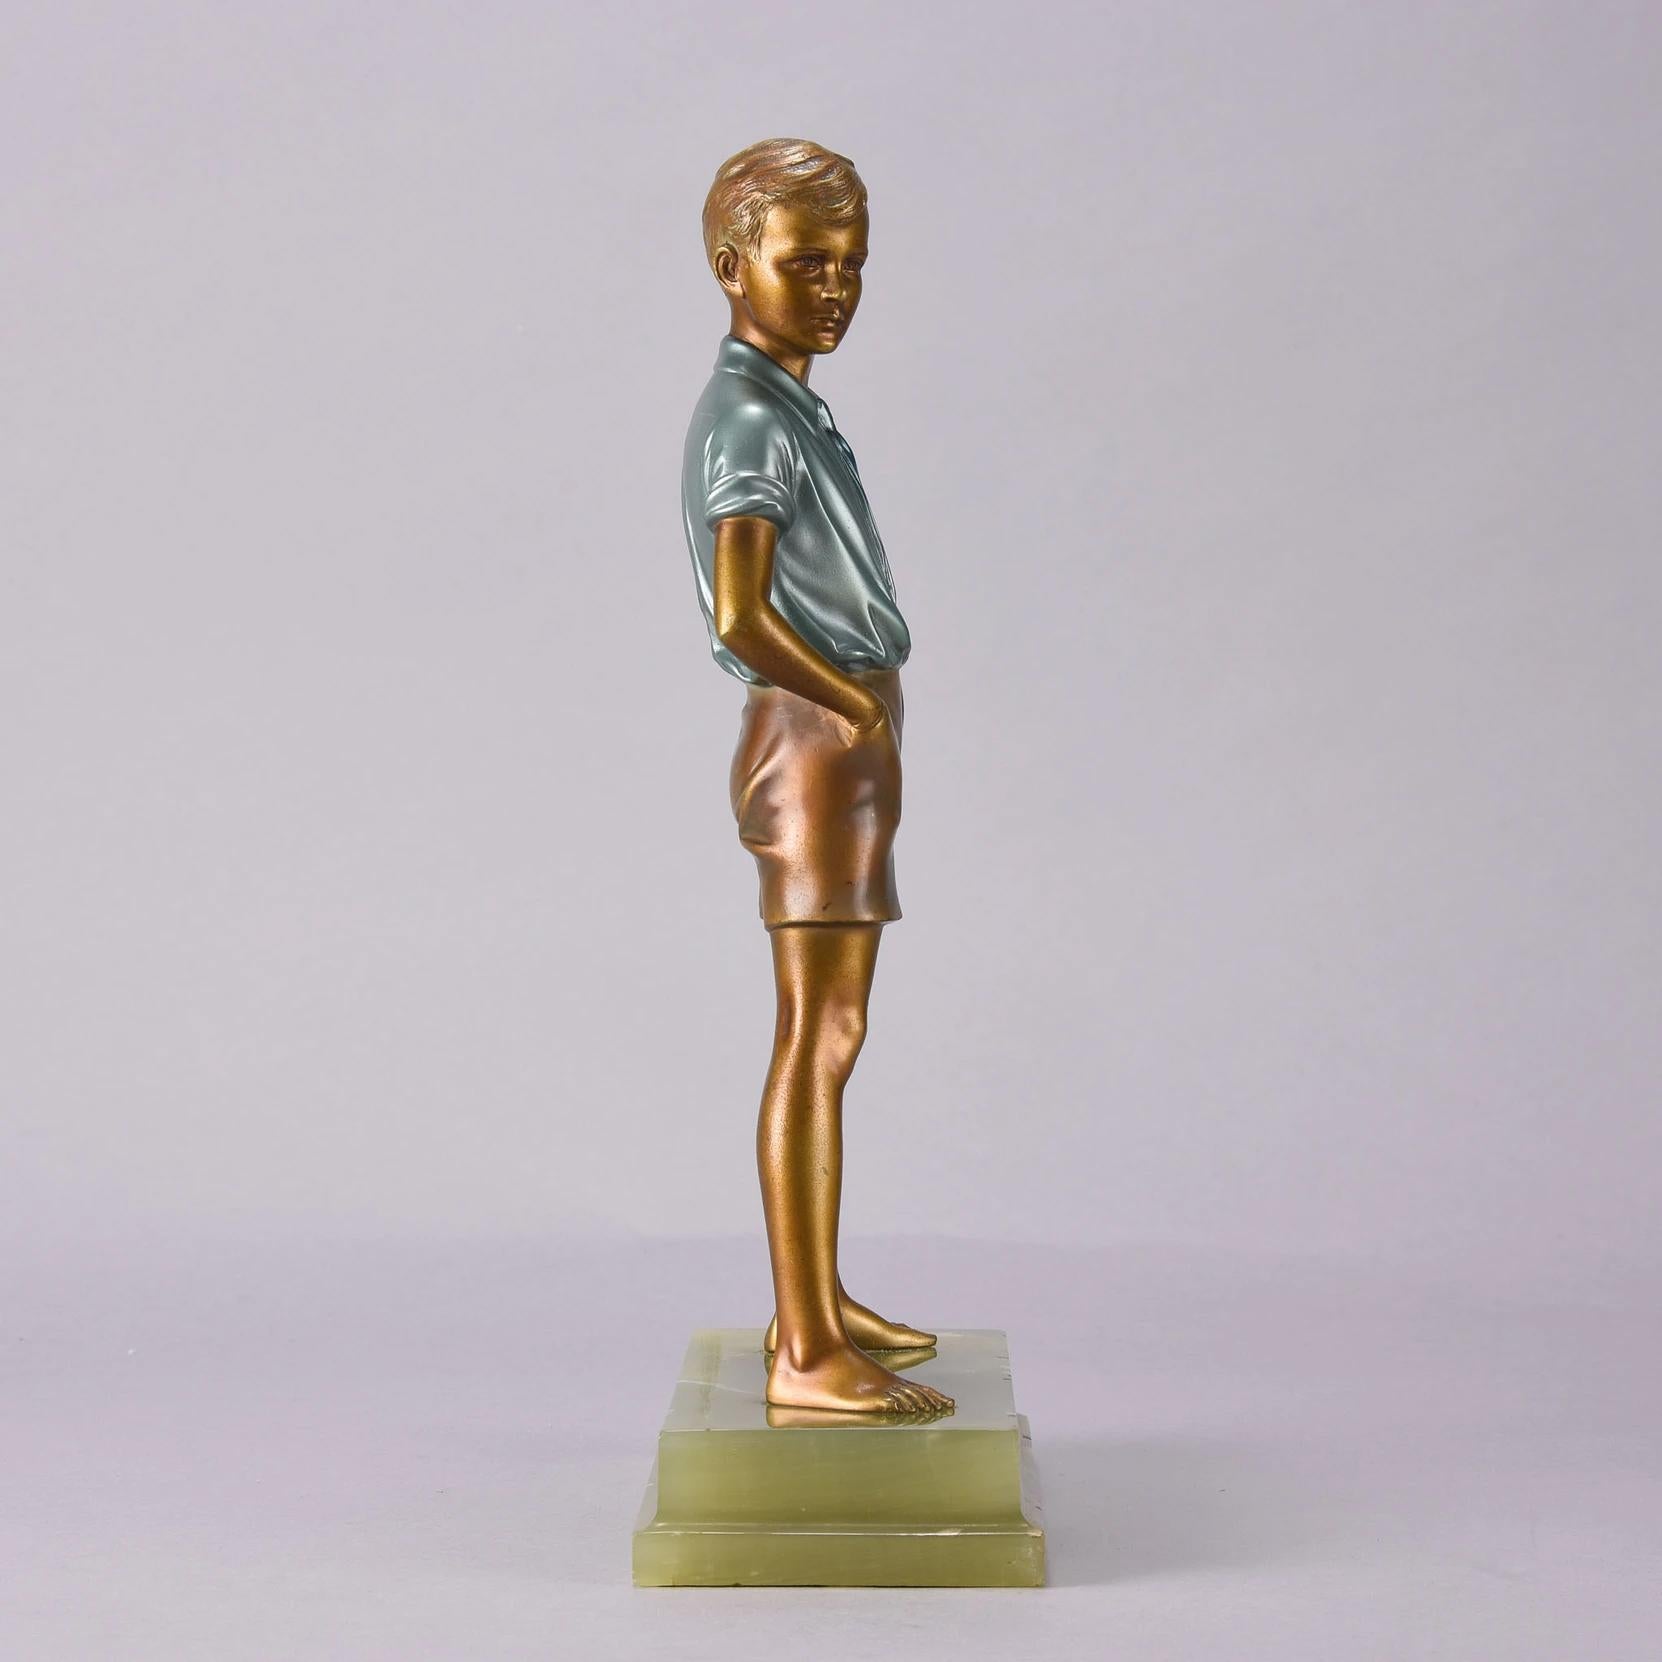 An excellent early 20th century Art Deco cold painted bronze figure of a young boy in shorts holding a book under his arm with his hands in his pockets. The bronze has excellent cold painted metallic enamel color and is raised on a rectangular